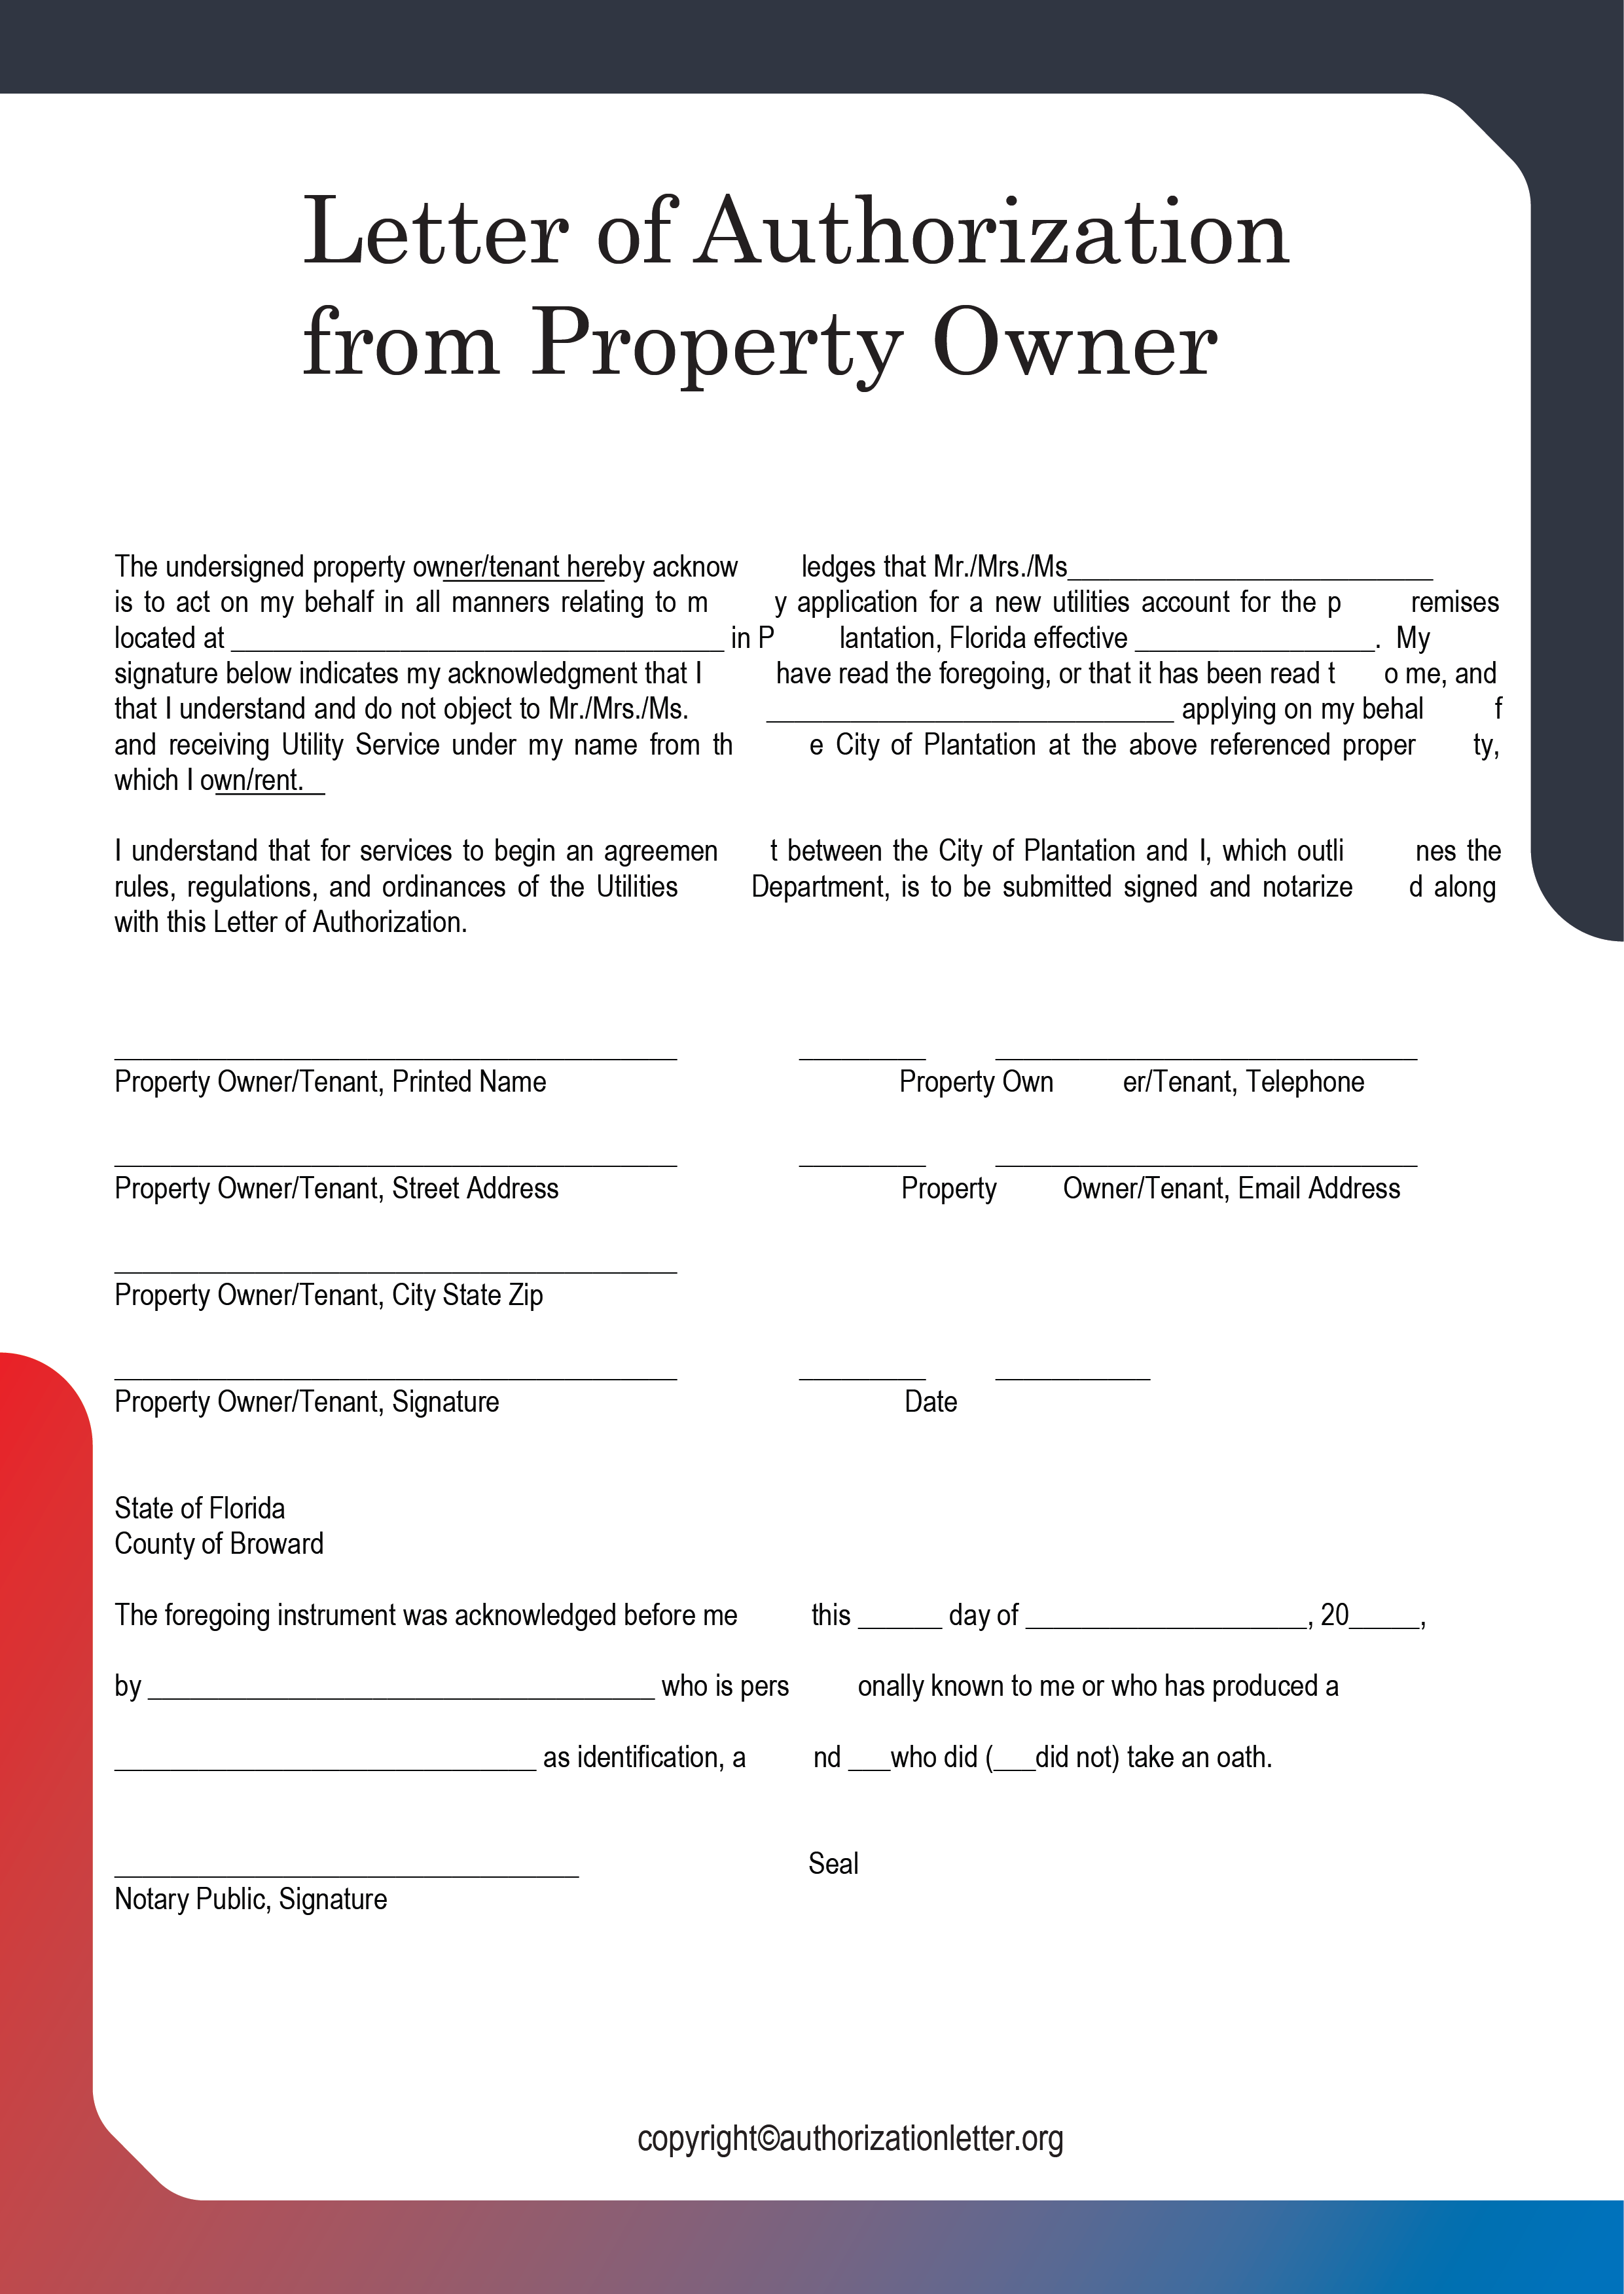 Free Property Owner Authorization Letter Template in PDF